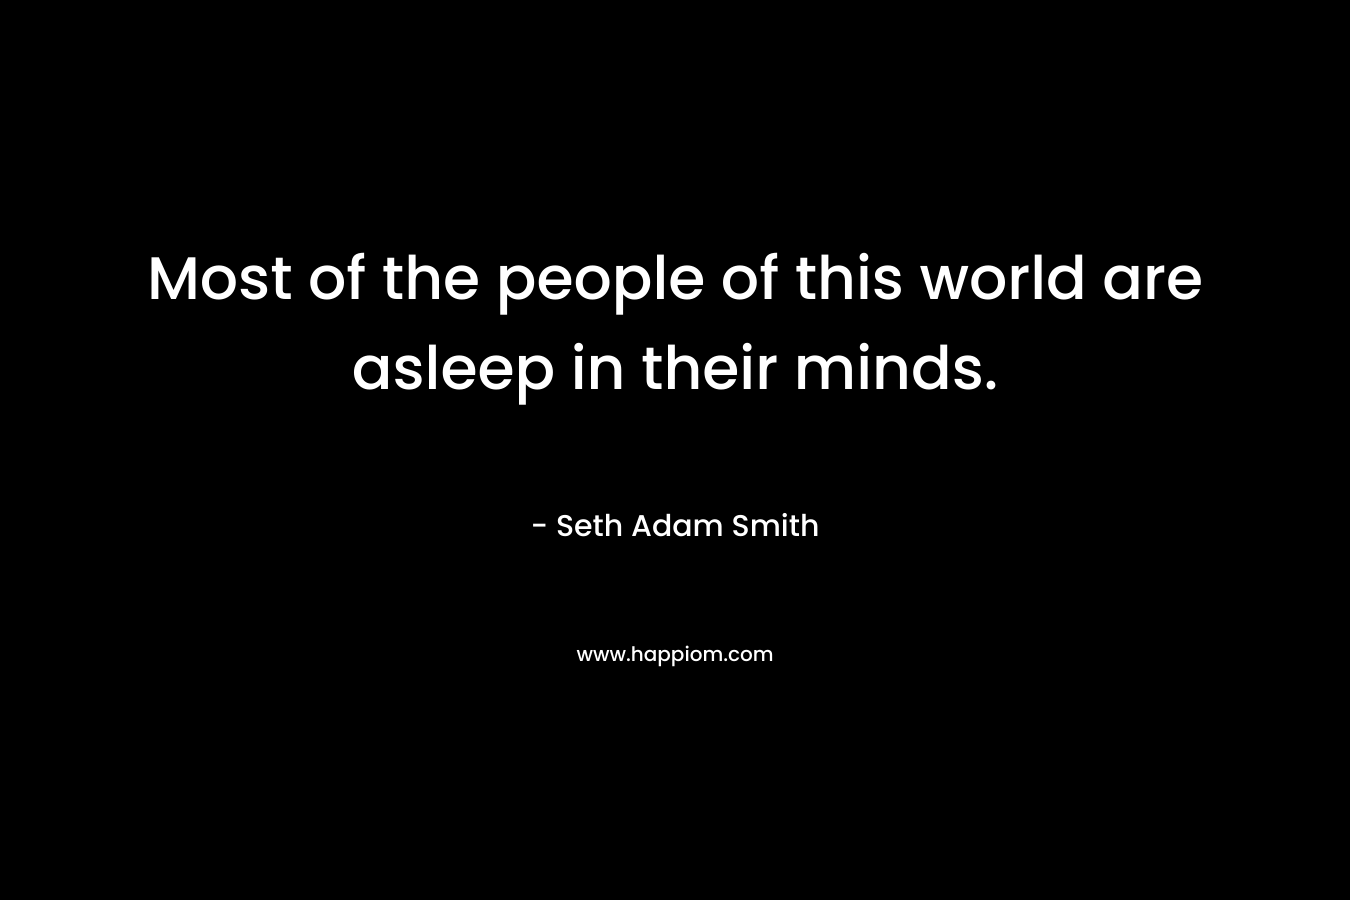 Most of the people of this world are asleep in their minds.